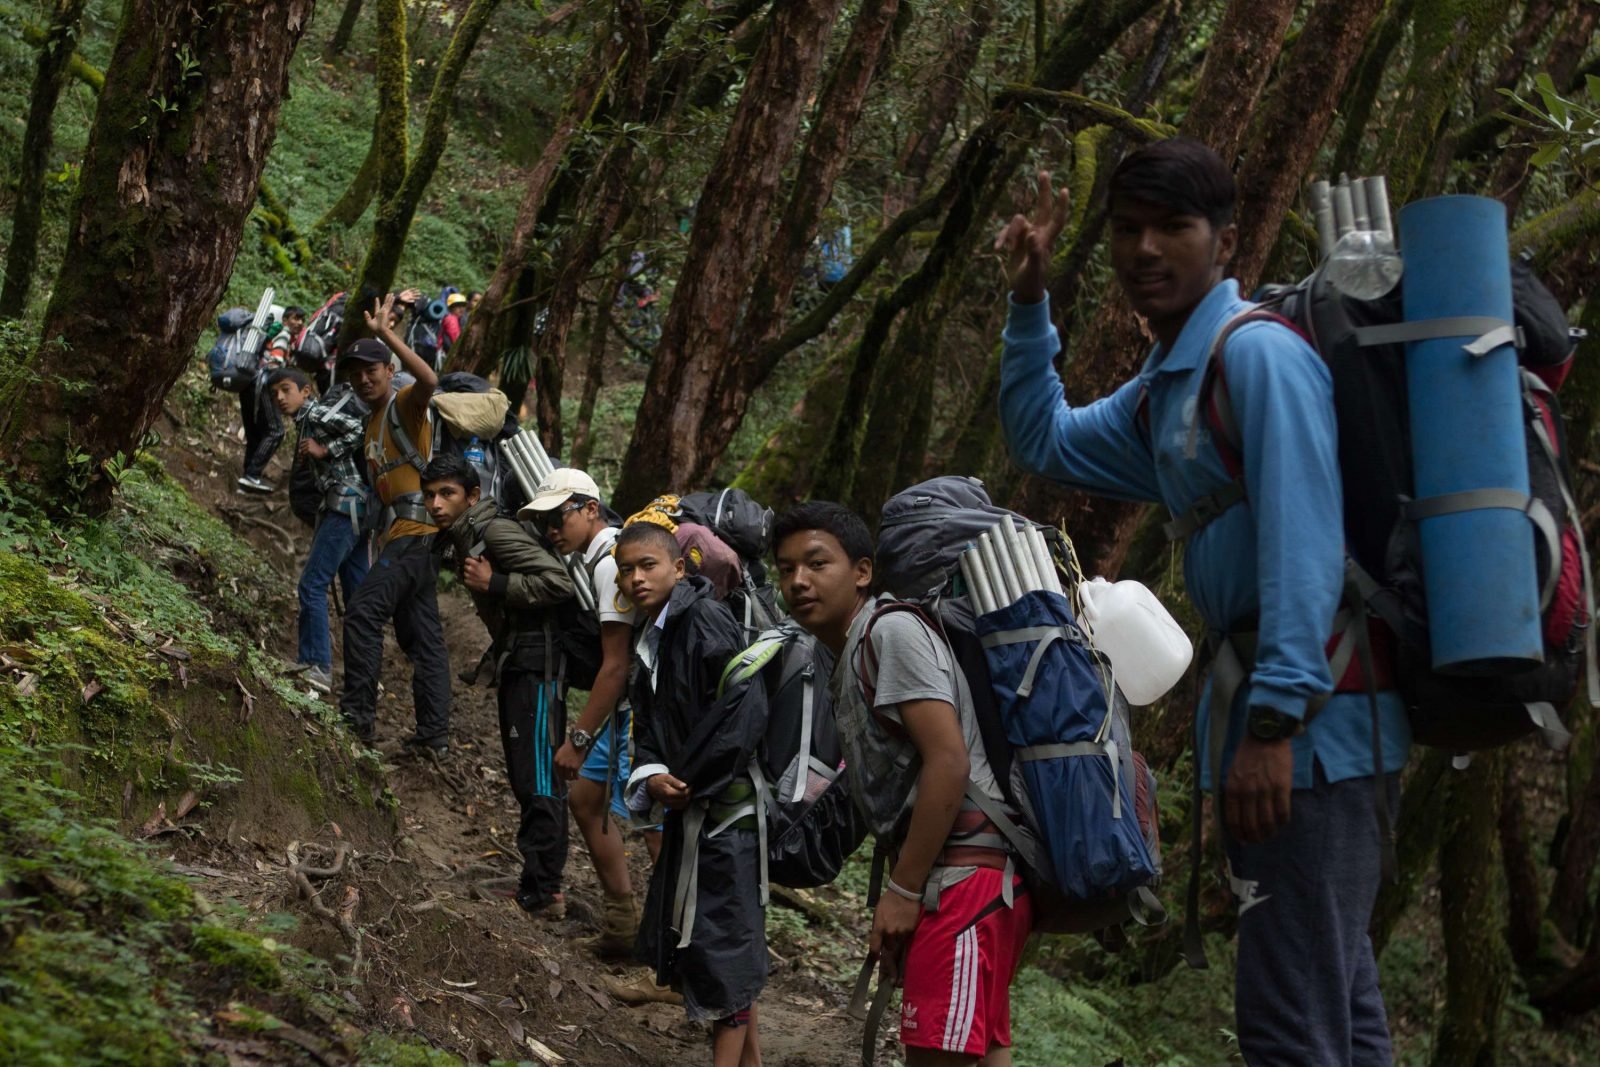 A youth group trekking through a forest to Mardi Base Camp, in Nepal.